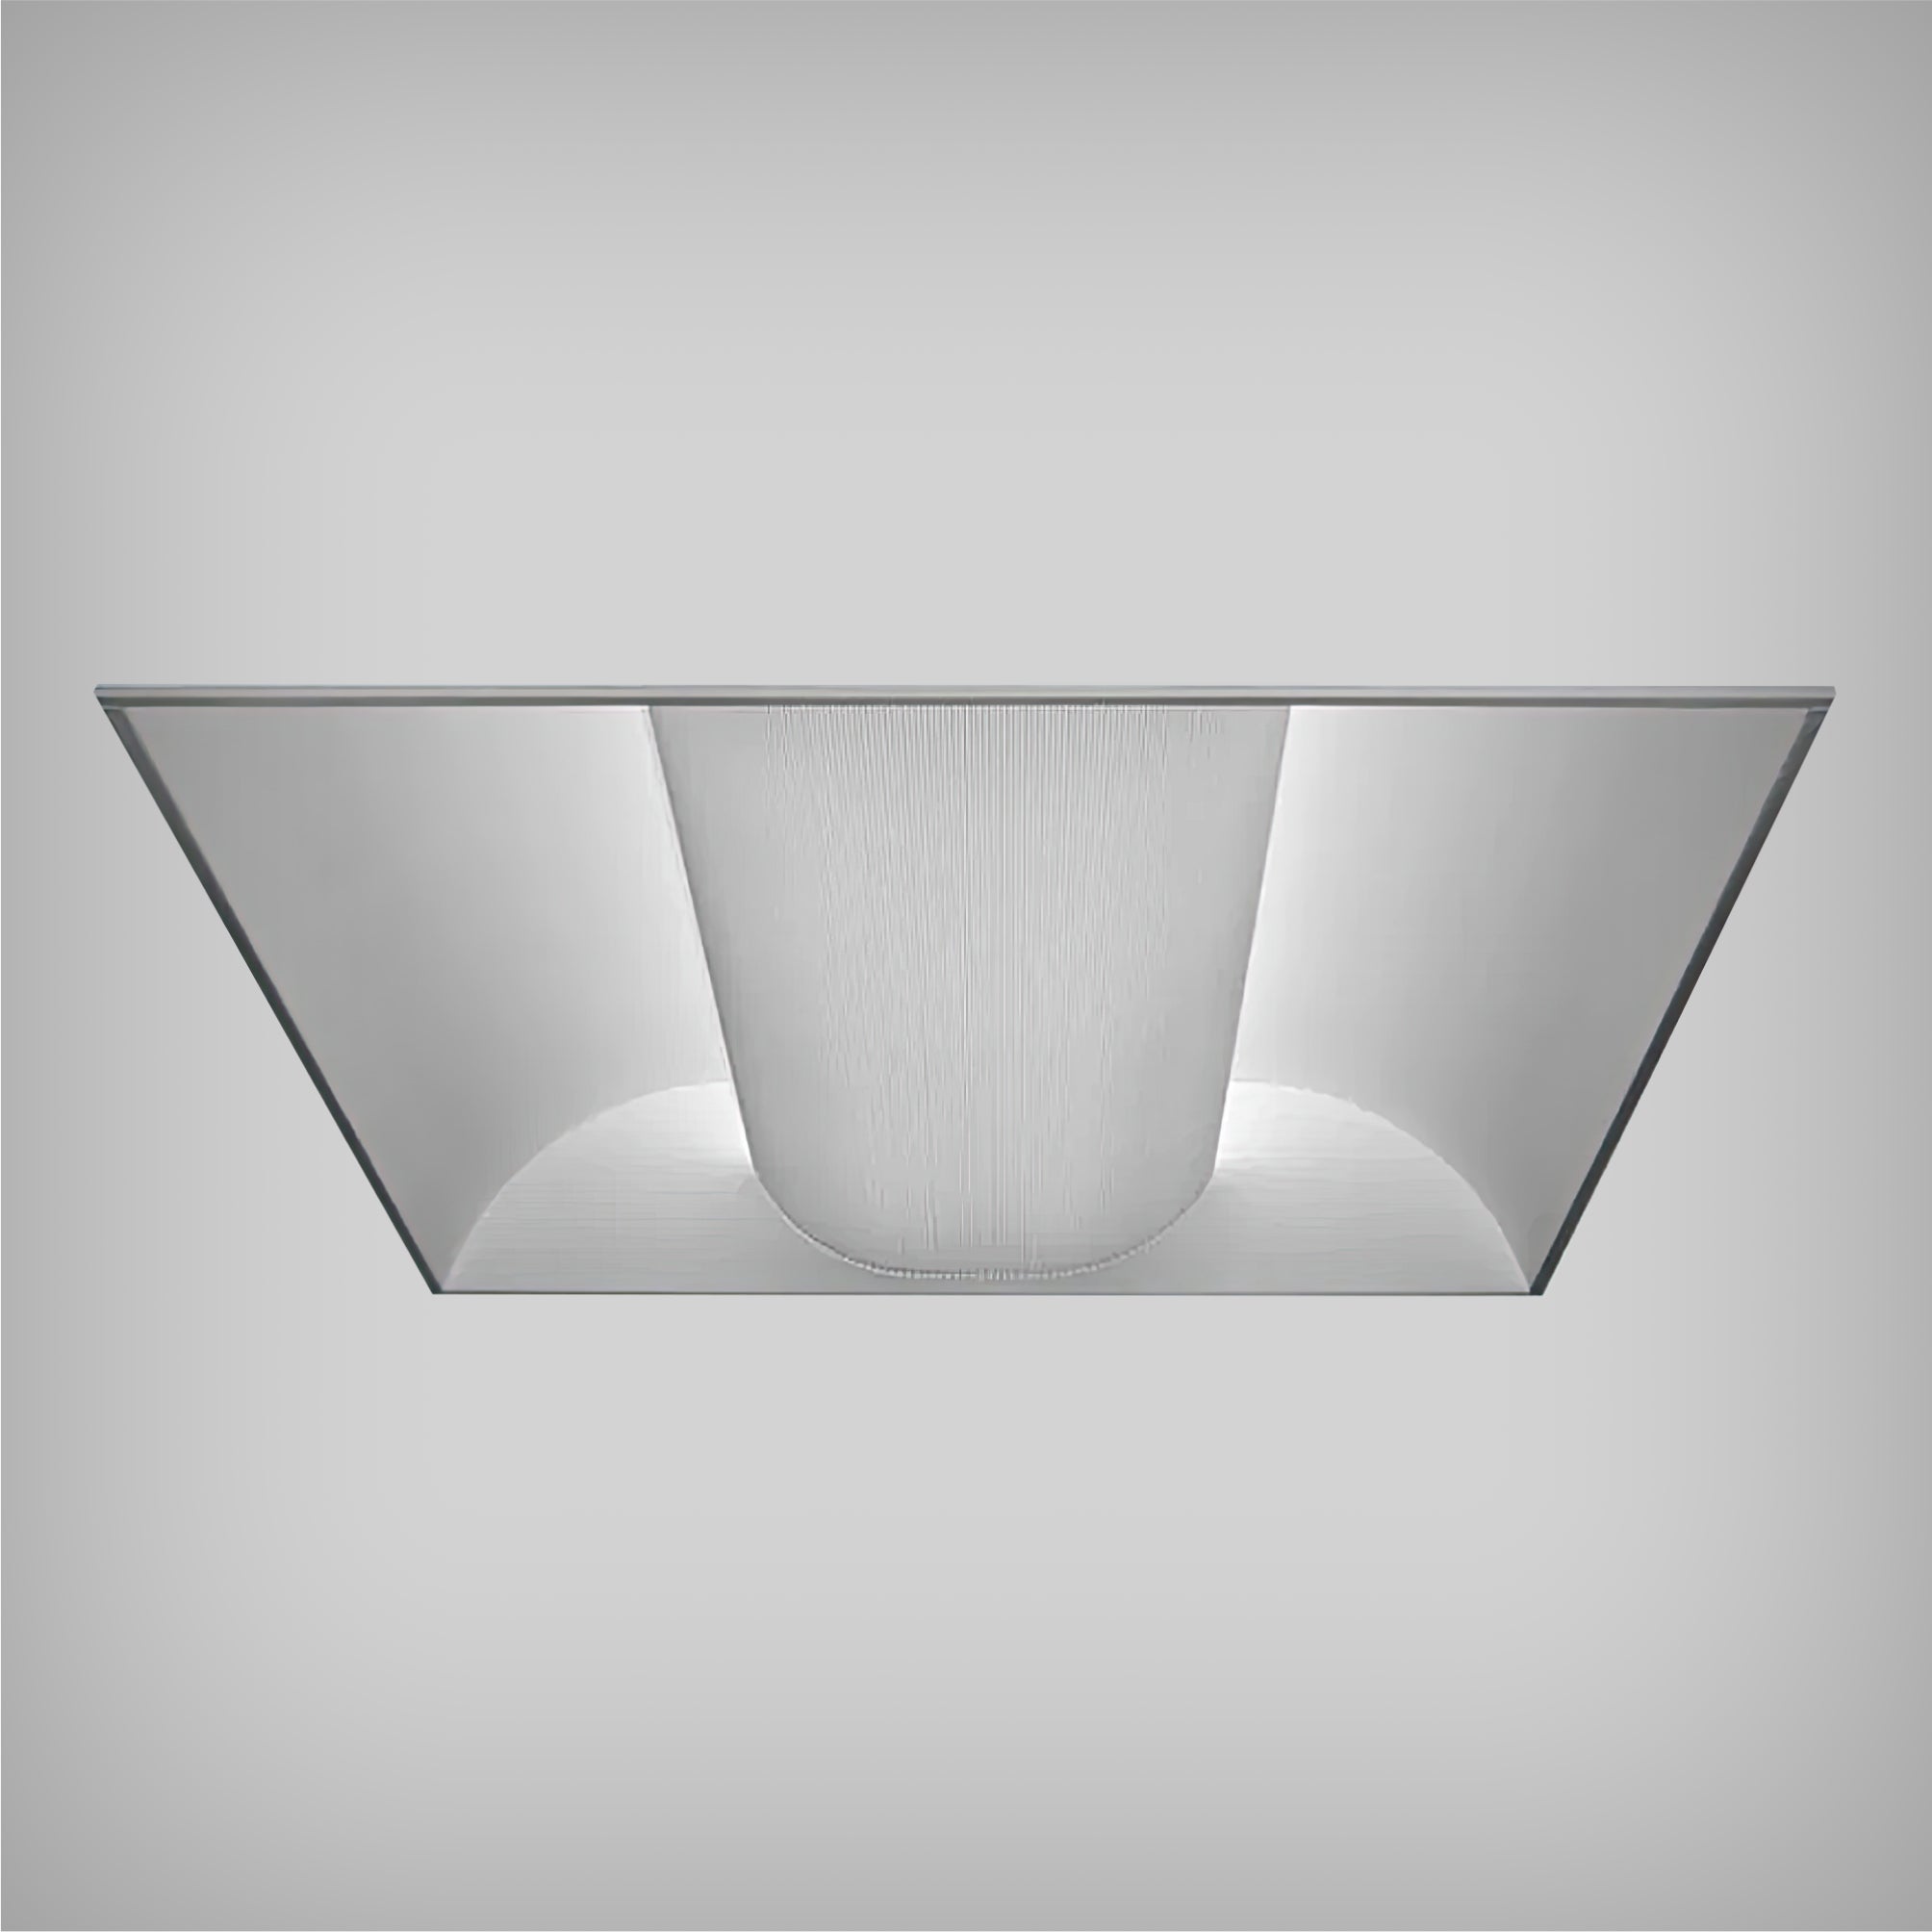 Architectural Elite LED Recessed Center Basket Troffer with Direct Lighting